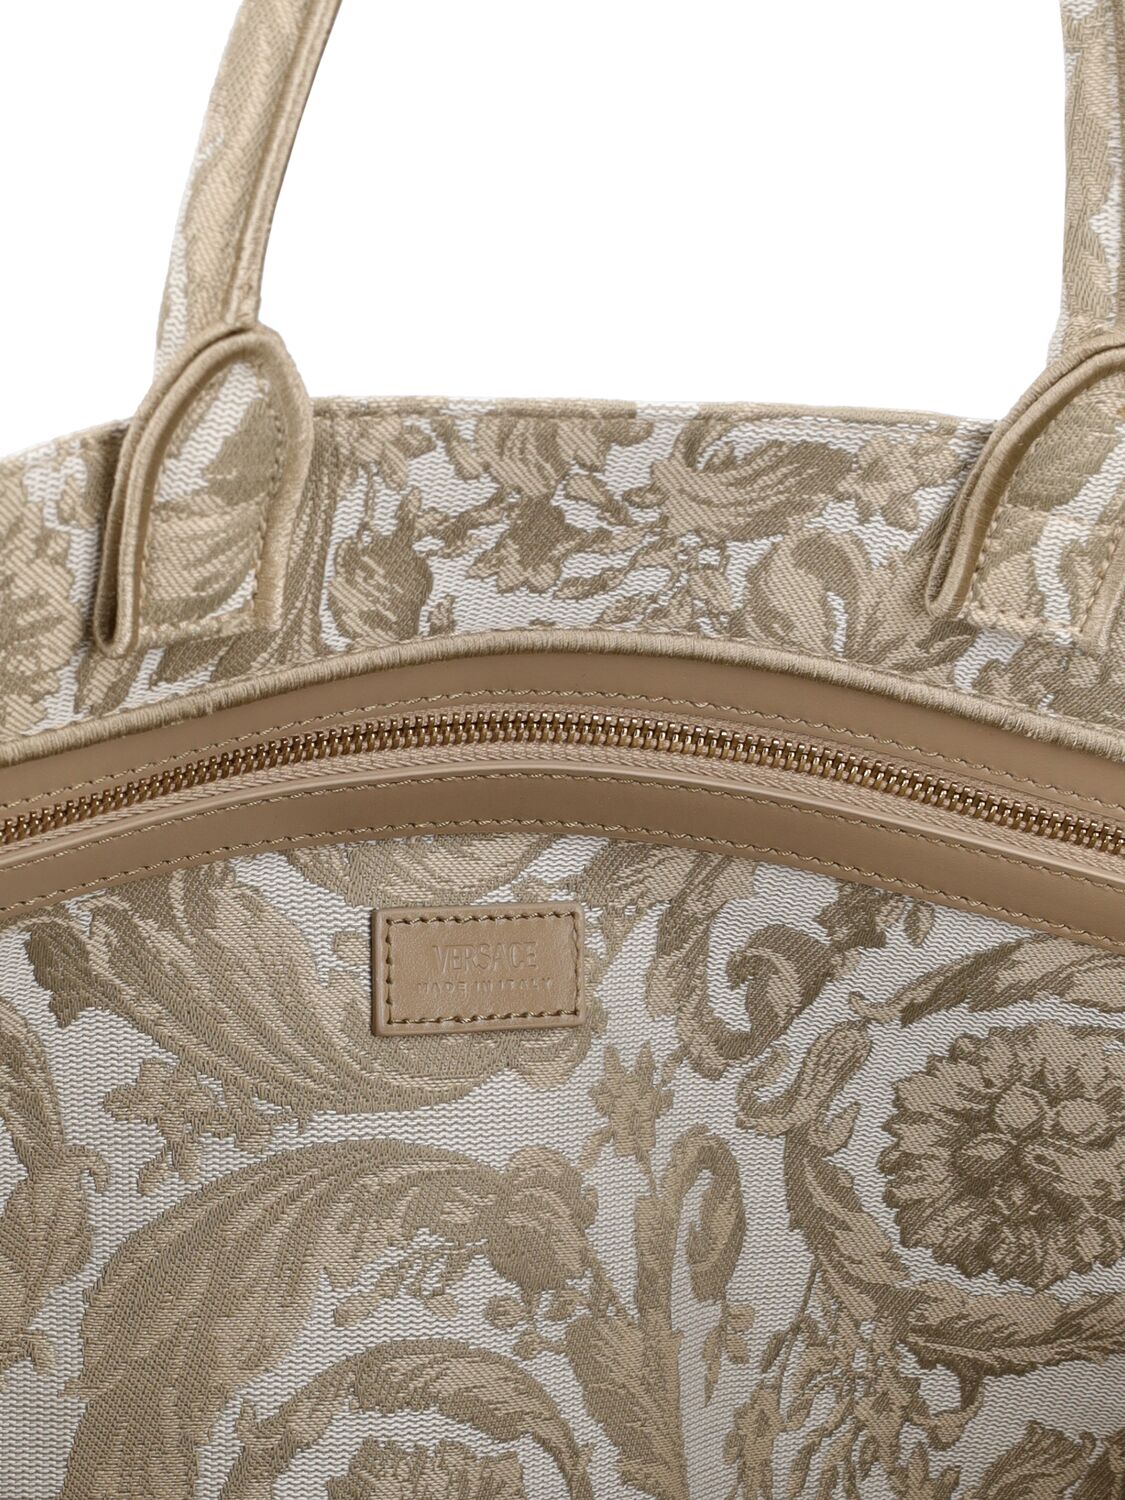 Shop Versace Large Barocco Jacquard Tote Bag In Beige